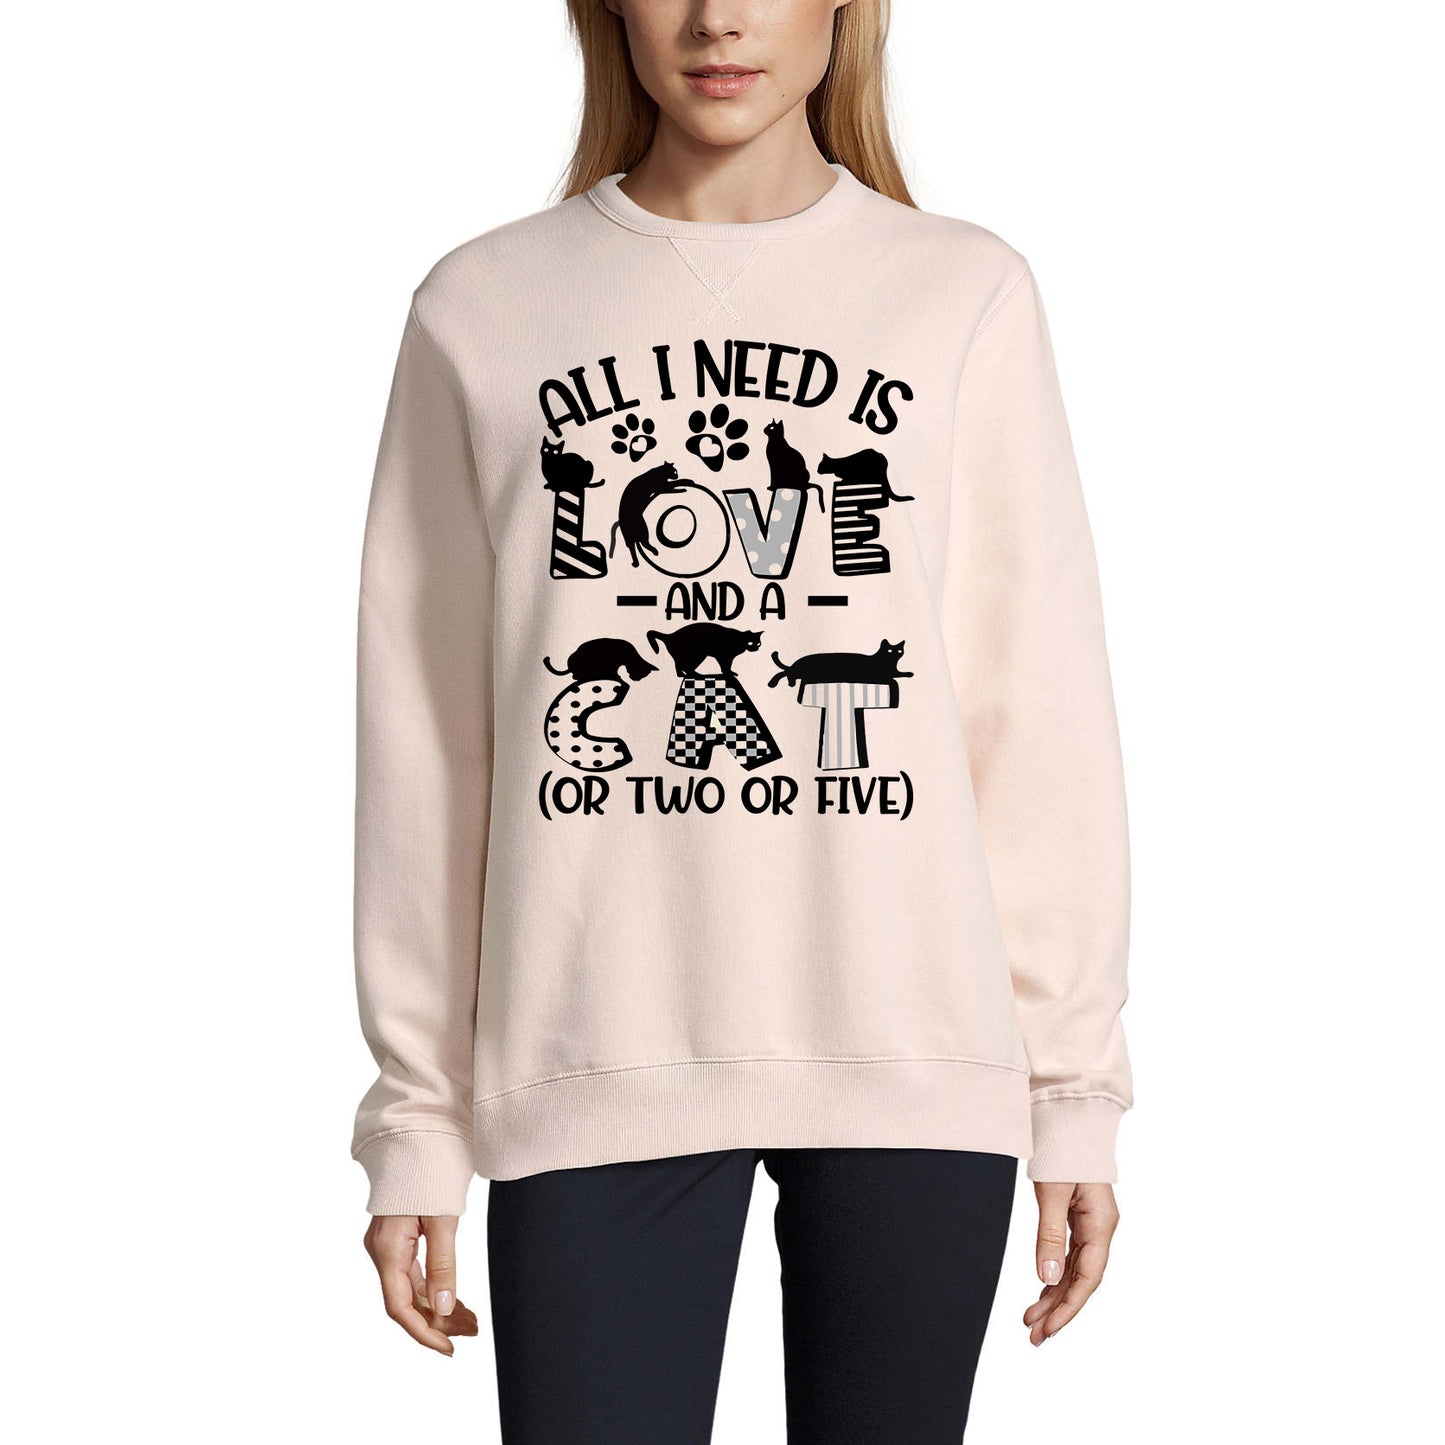 ULTRABASIC Women's Sweatshirt All I Need Is Love and a Cat - Funny Kitten Sweater